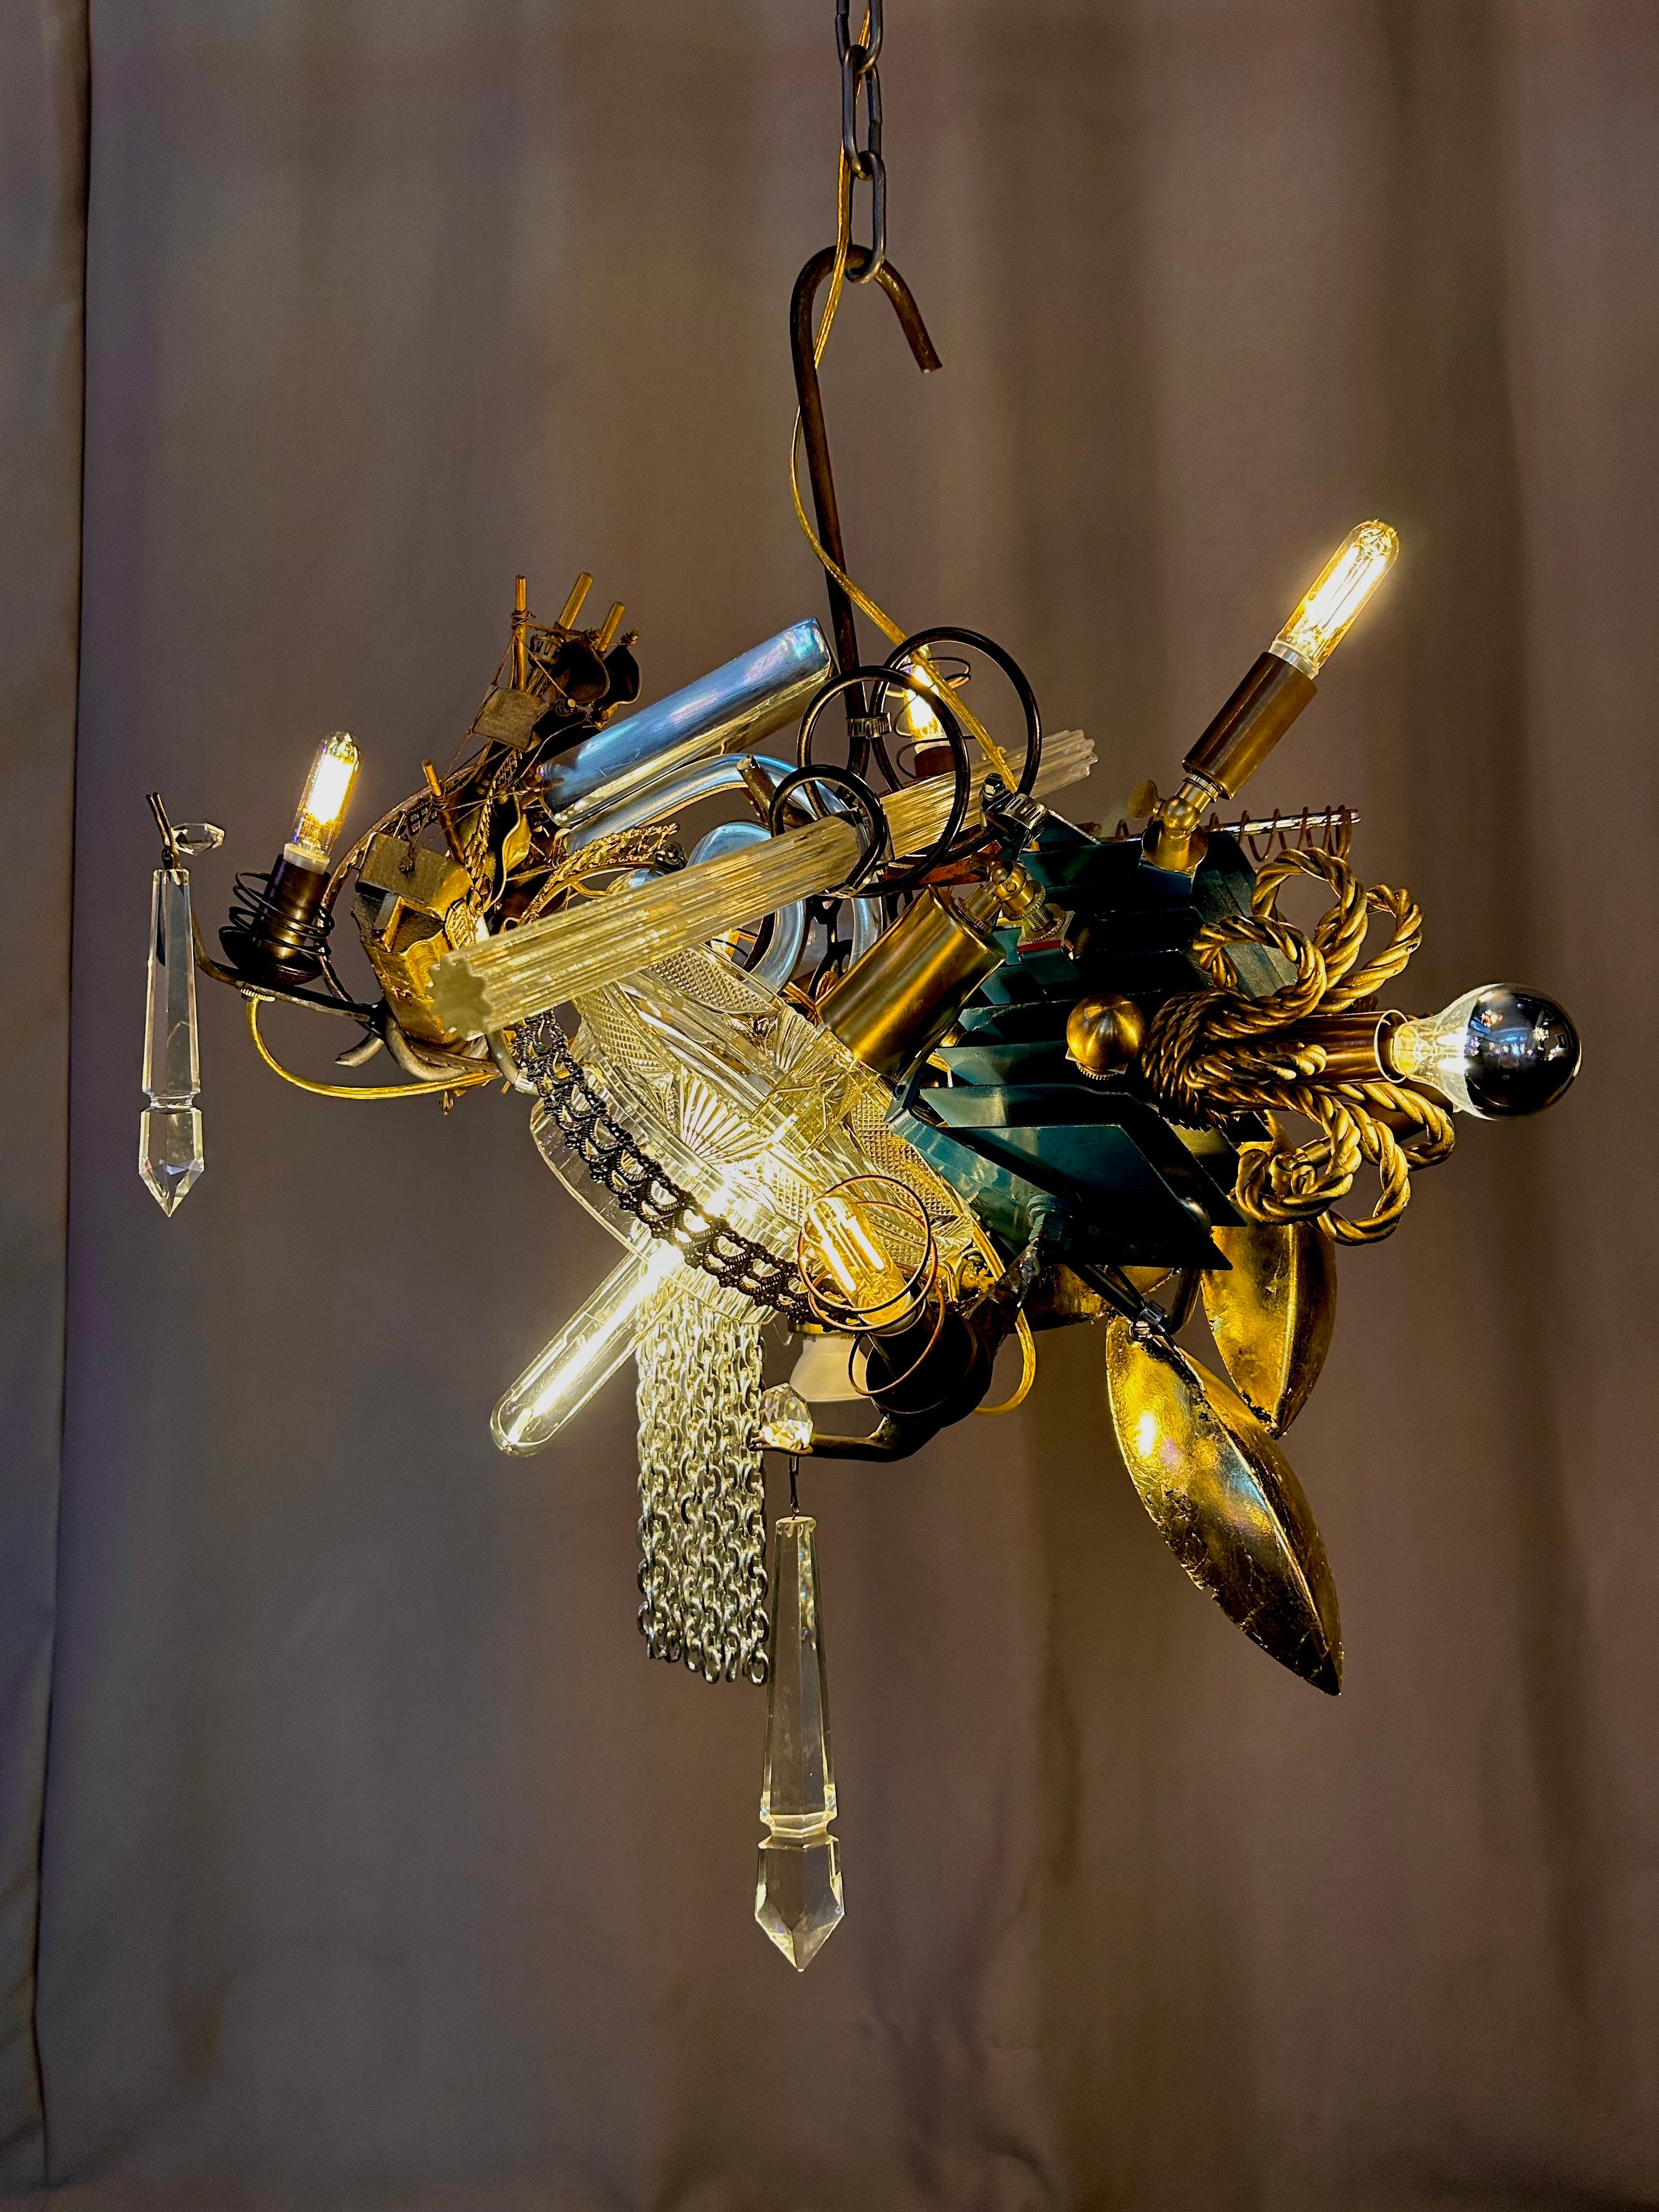 What elevates Warren Muller's lit sculptural chandeliers from mere crafstmanship is his visionary outlook. Warren selects, juxtaposes objects to incorporate an iconography of myths, fairy tales and personal idiosyncrasies into 